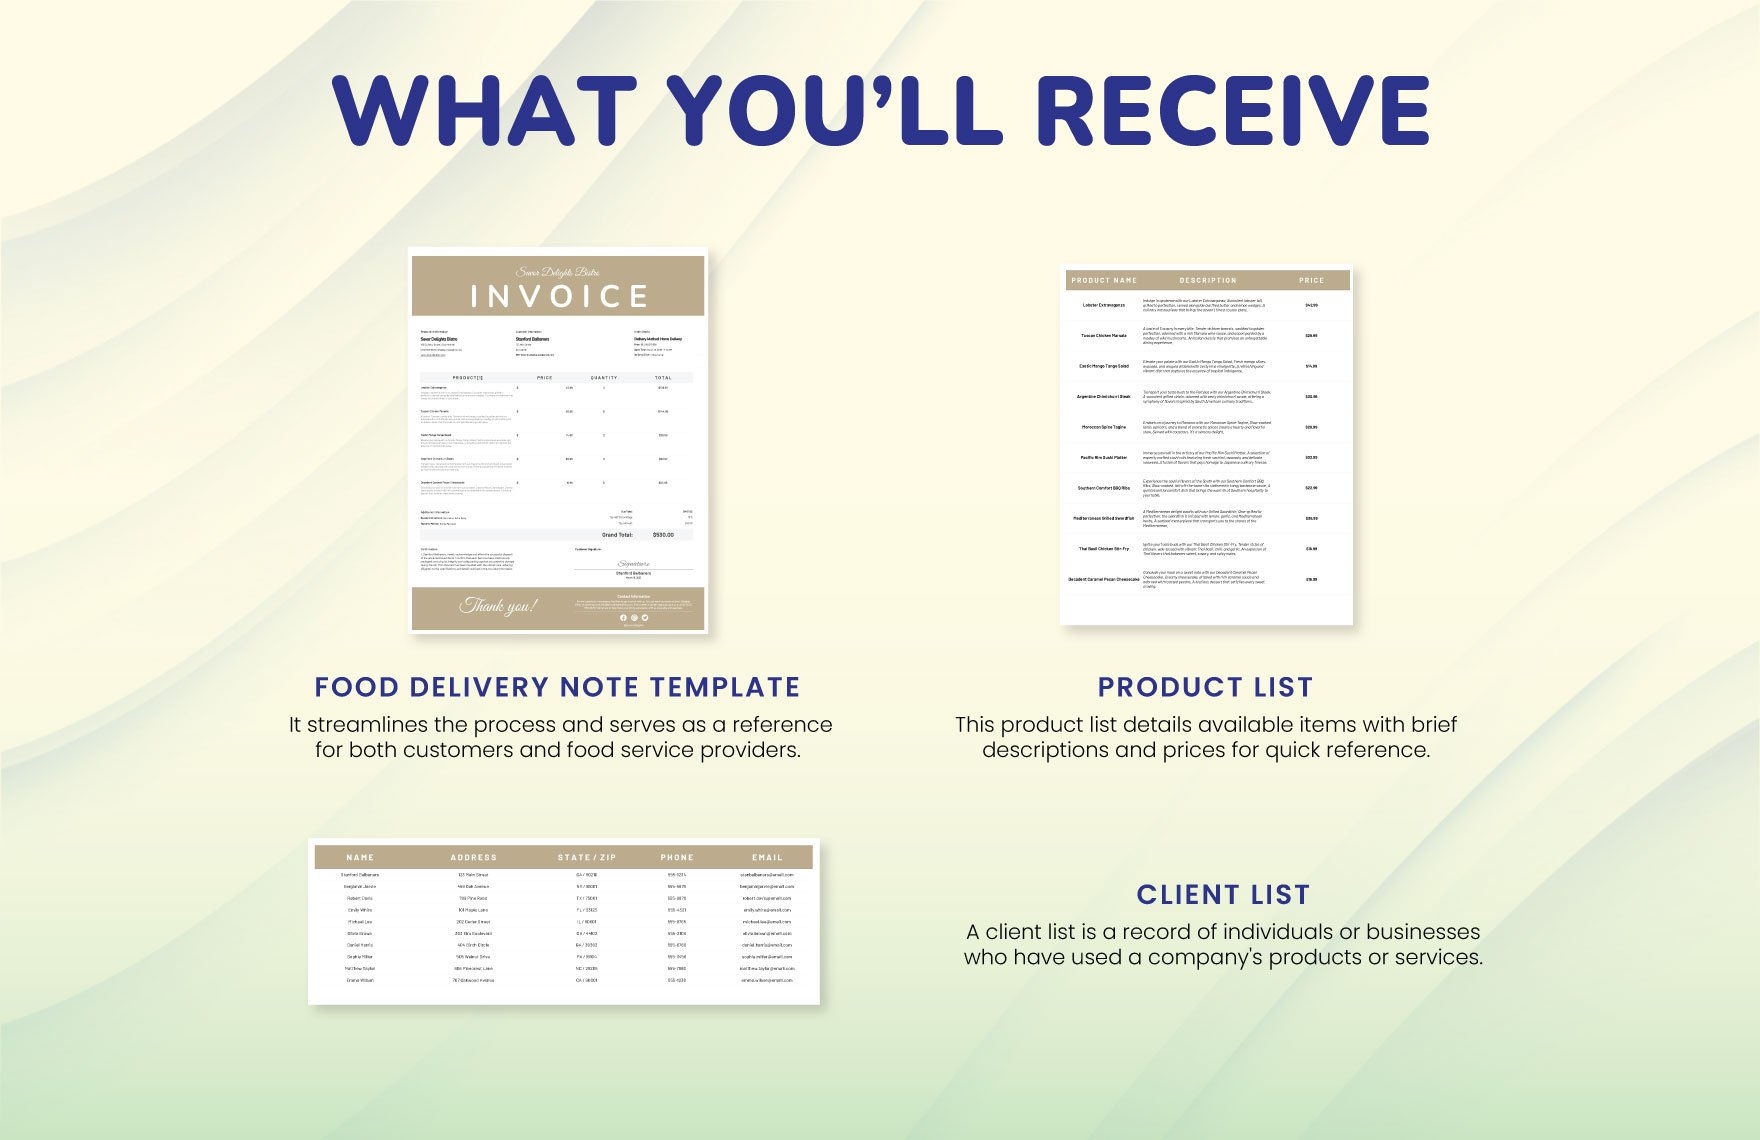 Food Delivery Note Template